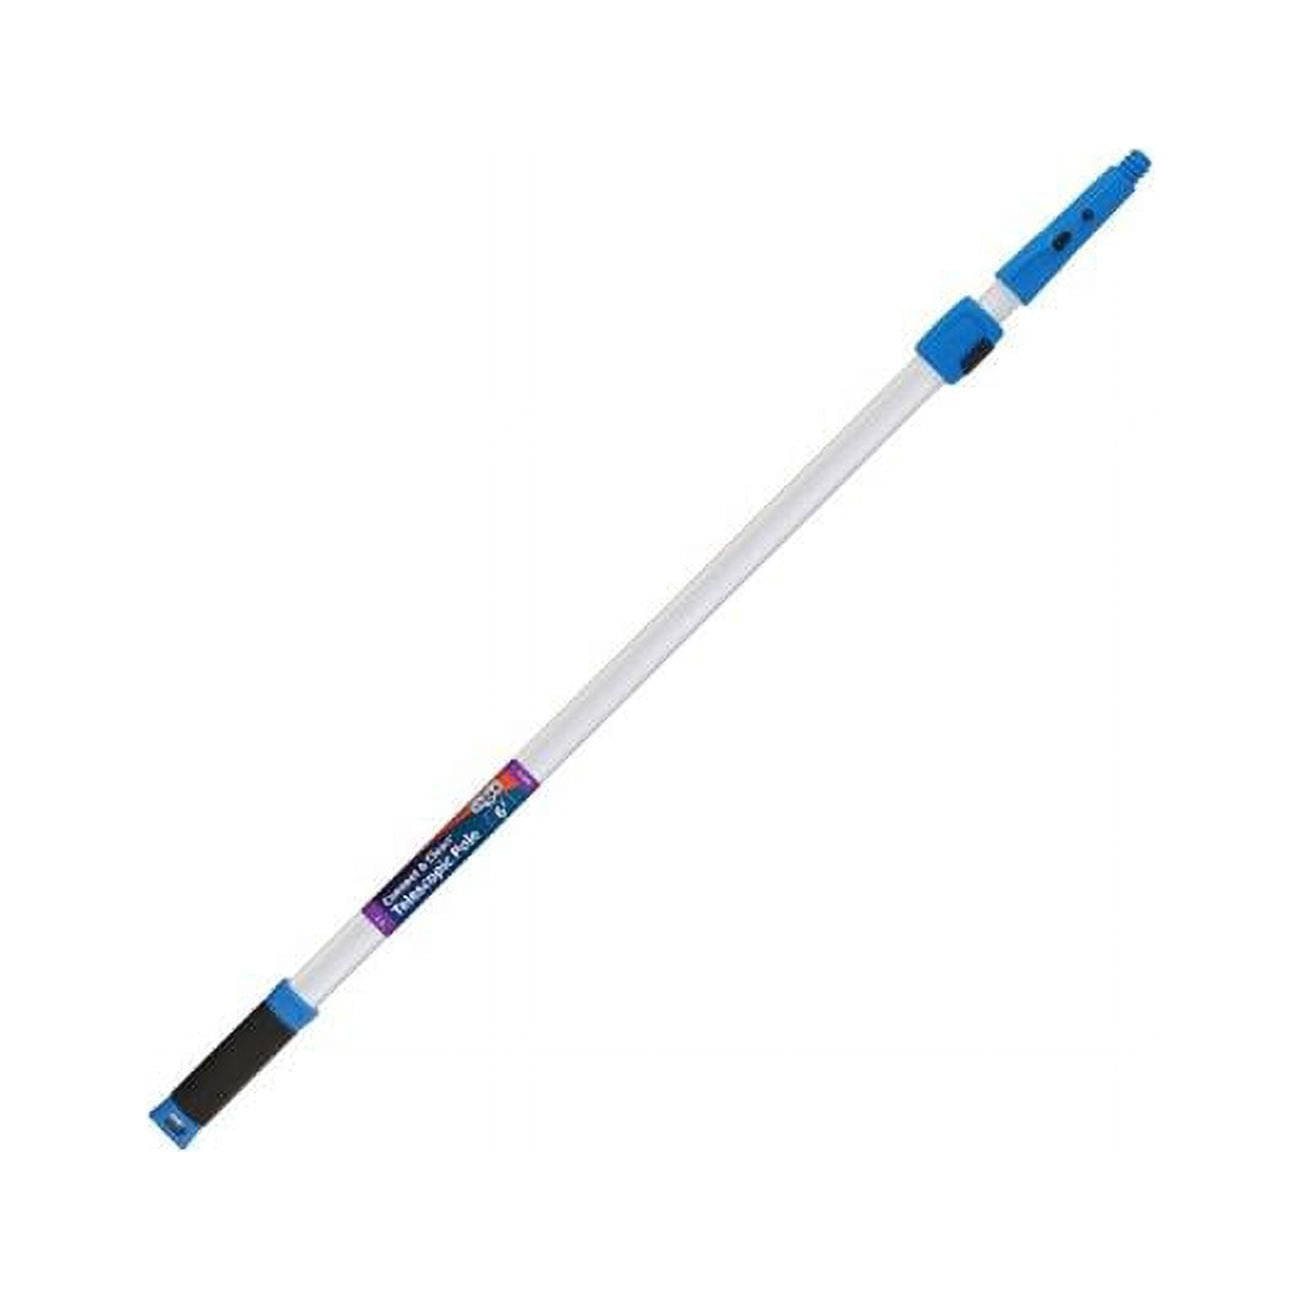 Unger 6 ft. x 2 in. Telescoping Aluminum Extension Pole, Blue & White